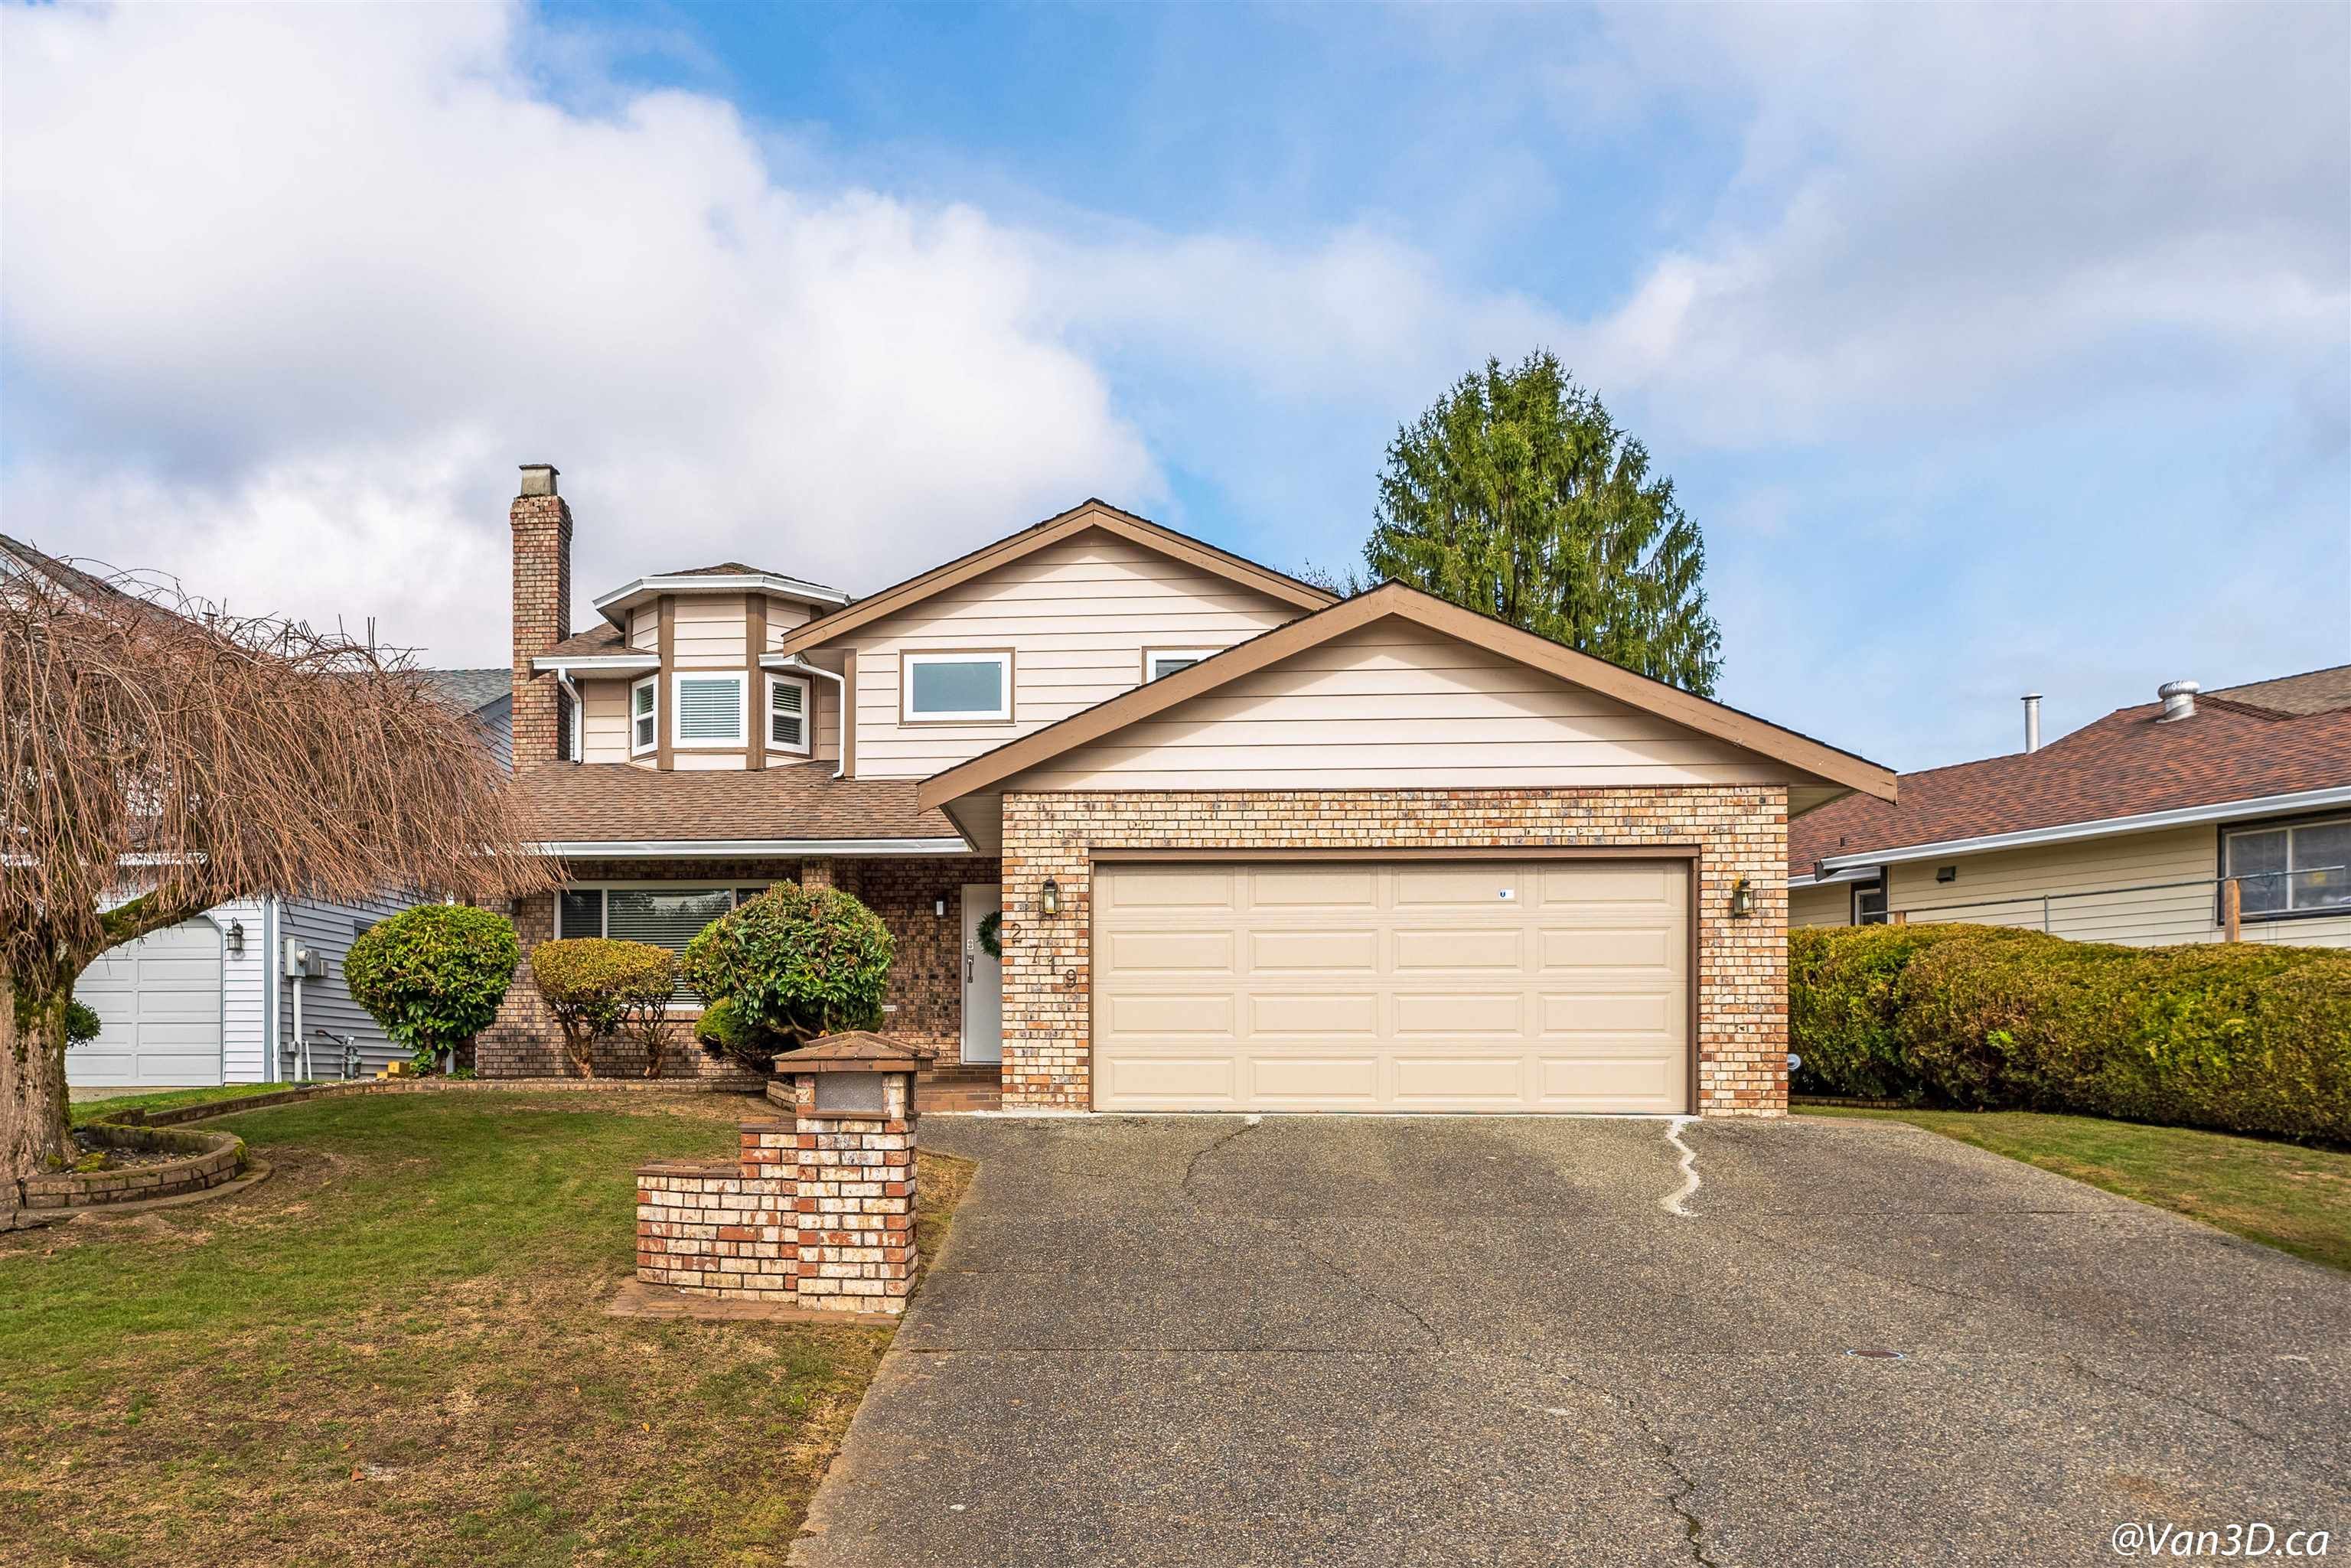 This property has sold: 2719 GOLDSTREAM CRES in Coquitlam